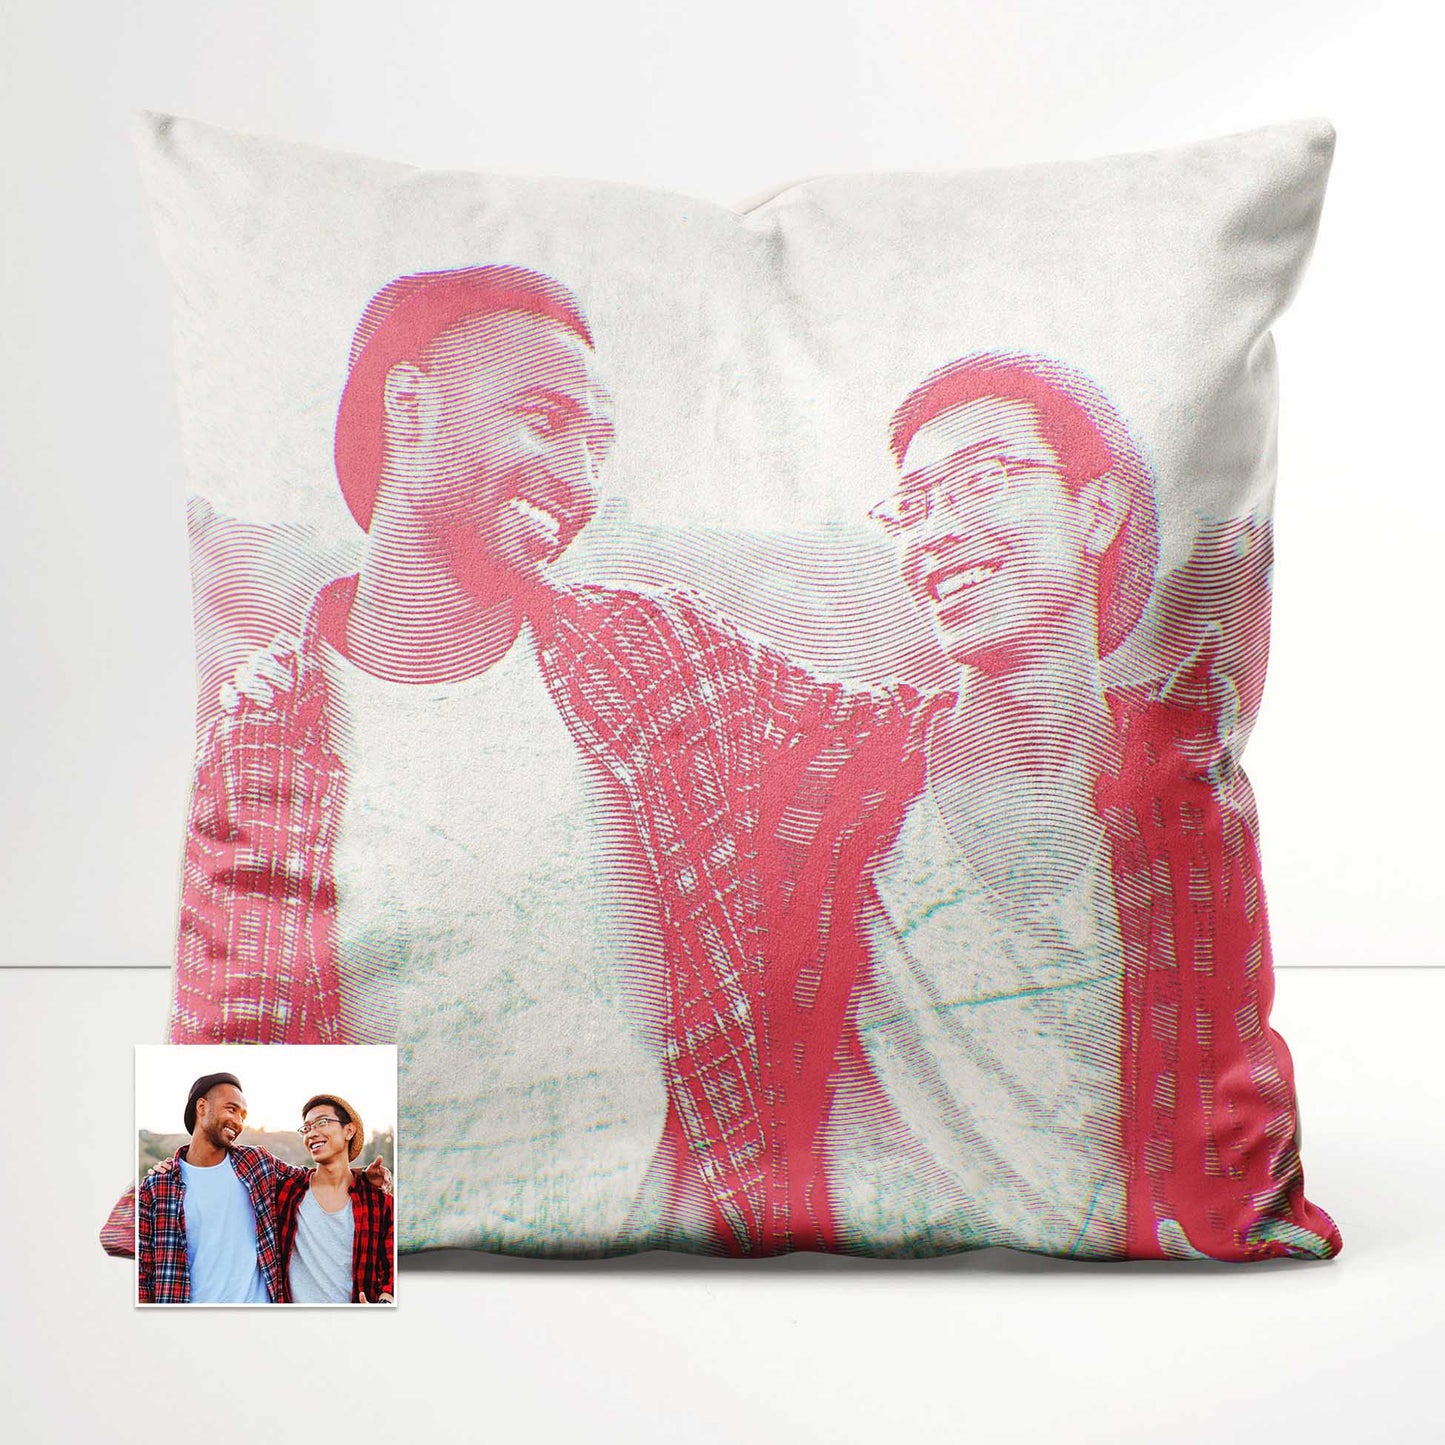 Add a touch of creativity to your home decor with the Personalised Pink Engraving Cushion. Its ability to print from a photo allows you to create a truly unique and original design. Made from soft velvet, luxury cushion 